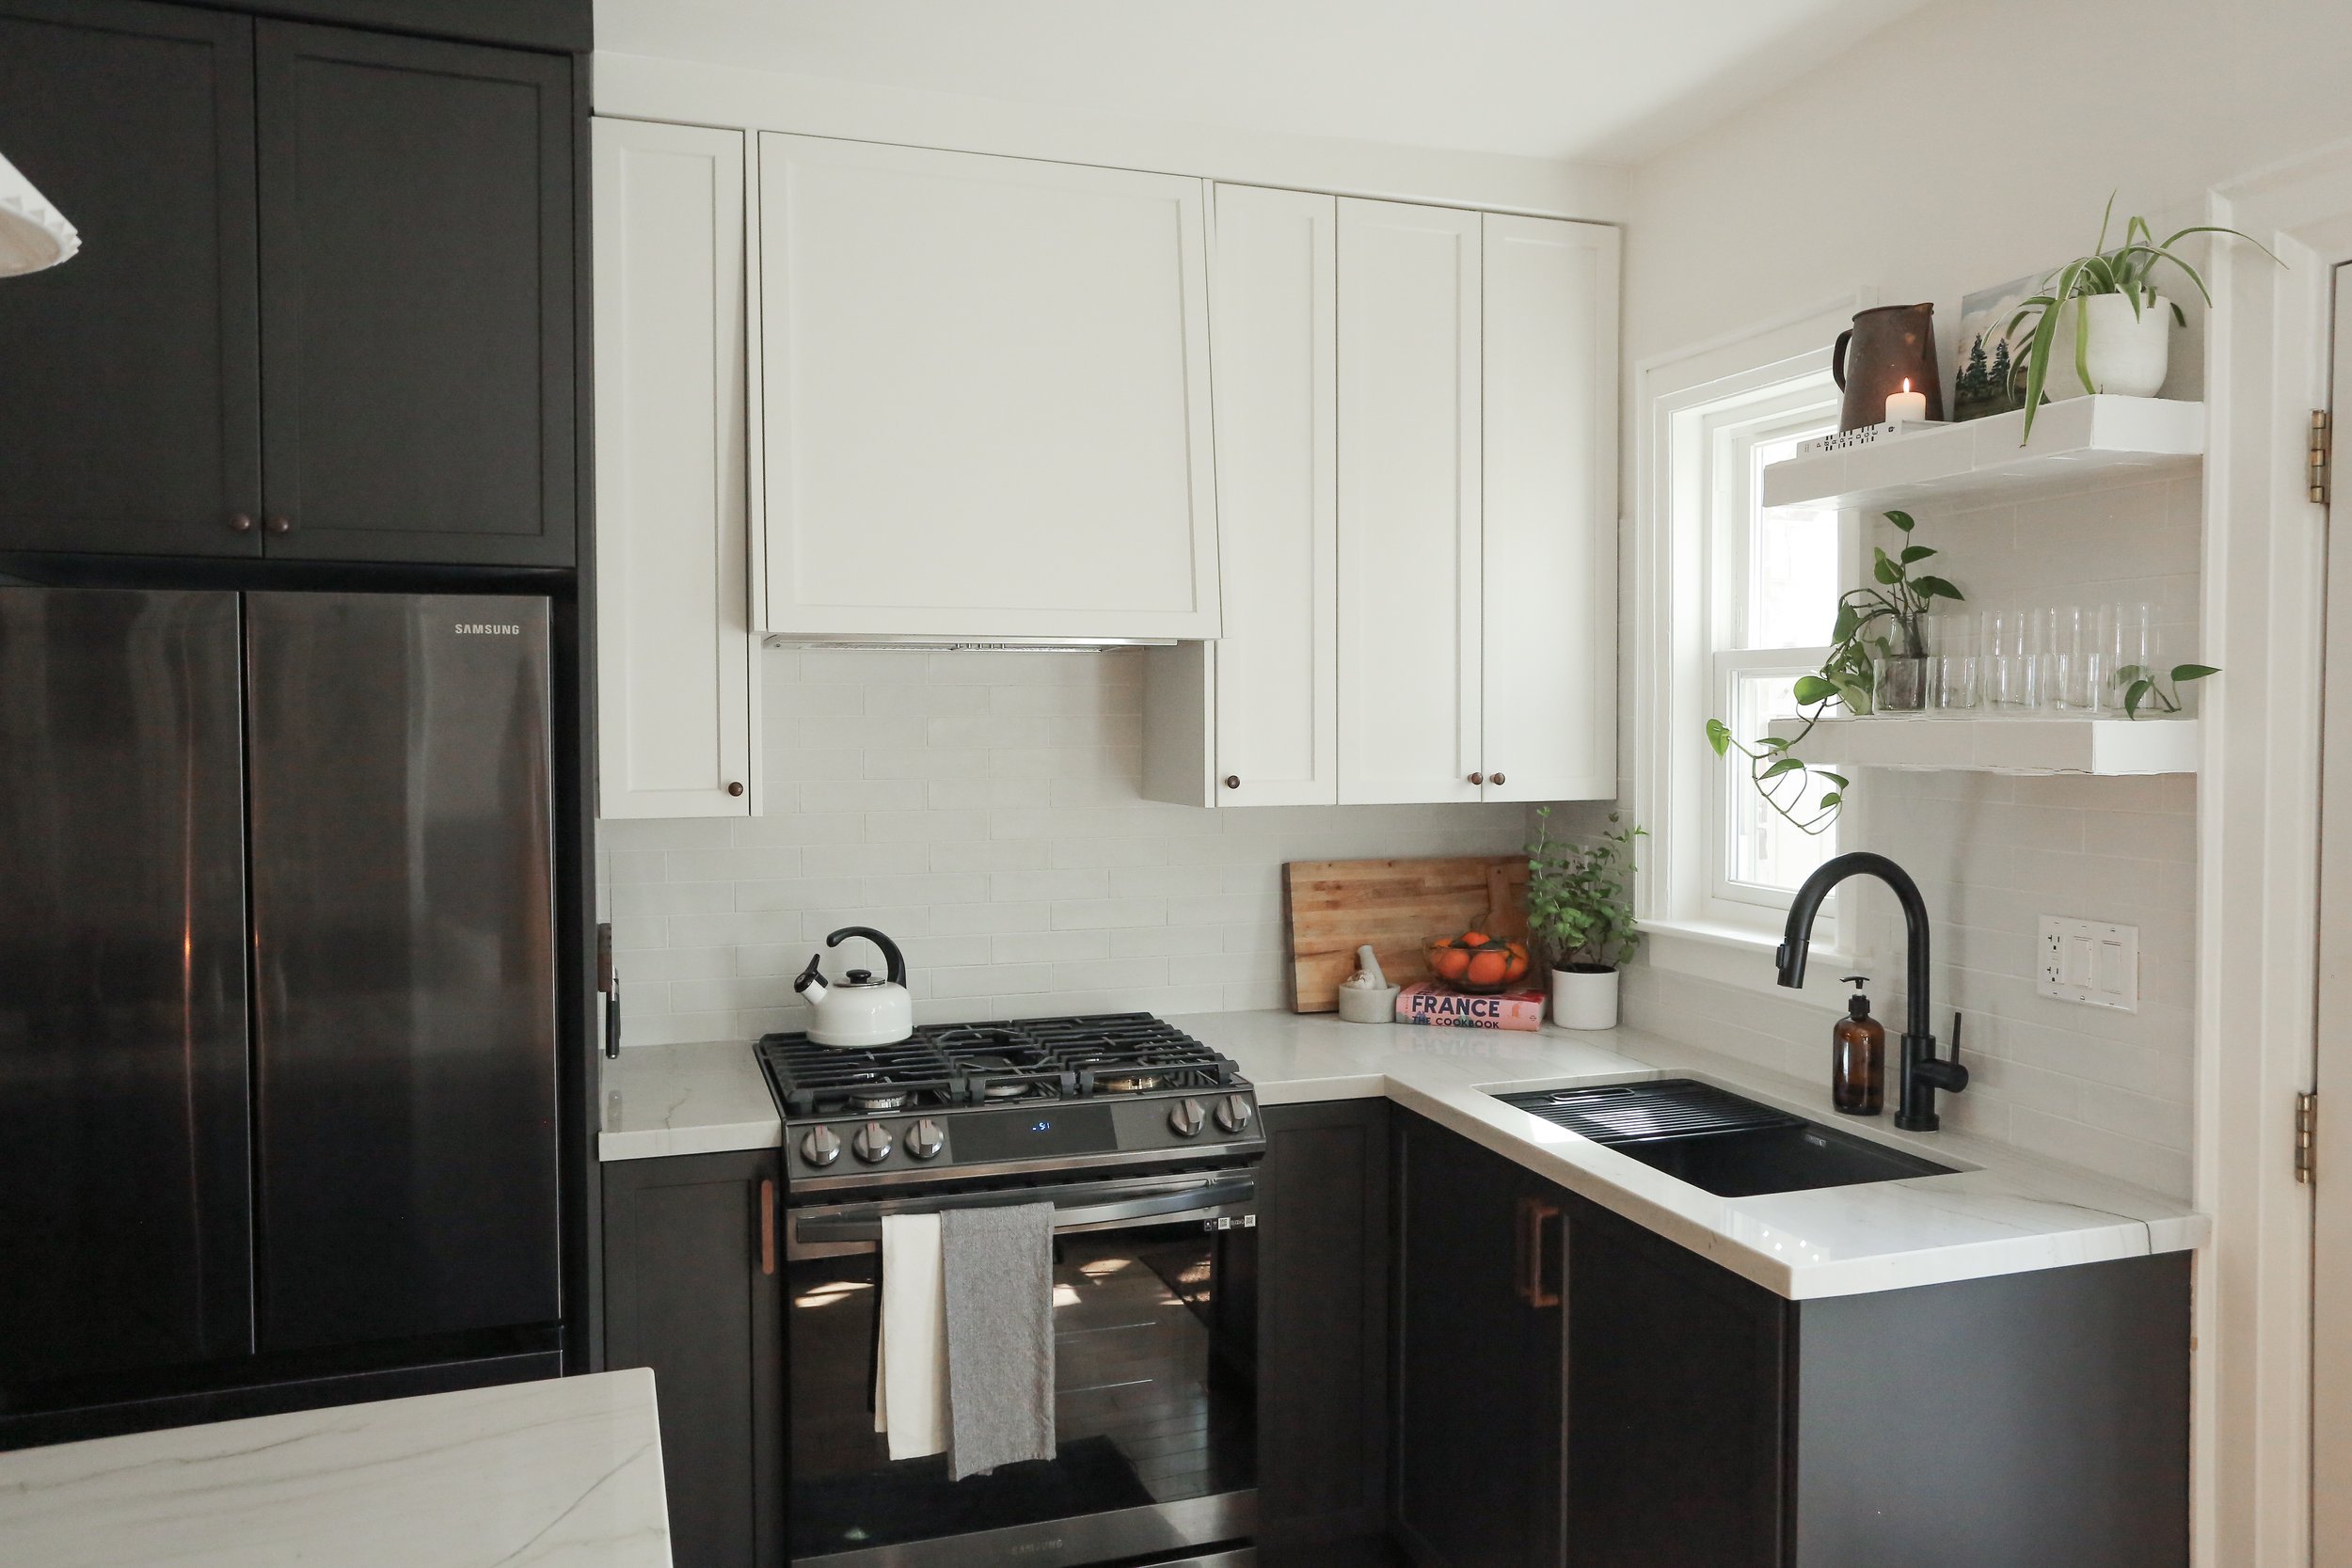 These 25 Kitchen Design Ideas Will Inspire You to Call a Contractor Right  Now